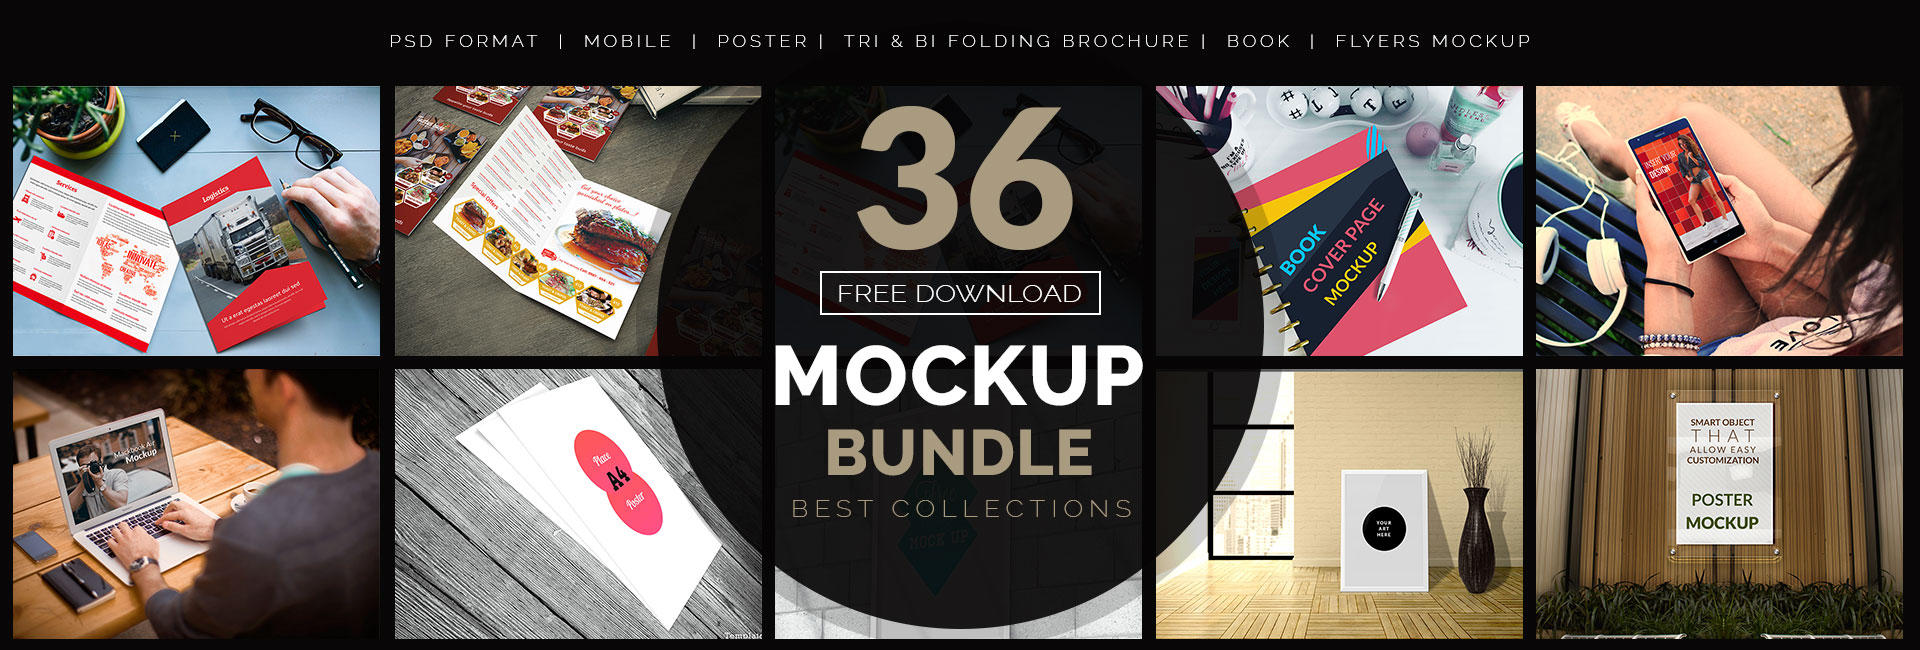 Download 21 Free Mock Up Templates Poster Mobile Free Premium Templates PSD Mockup Templates